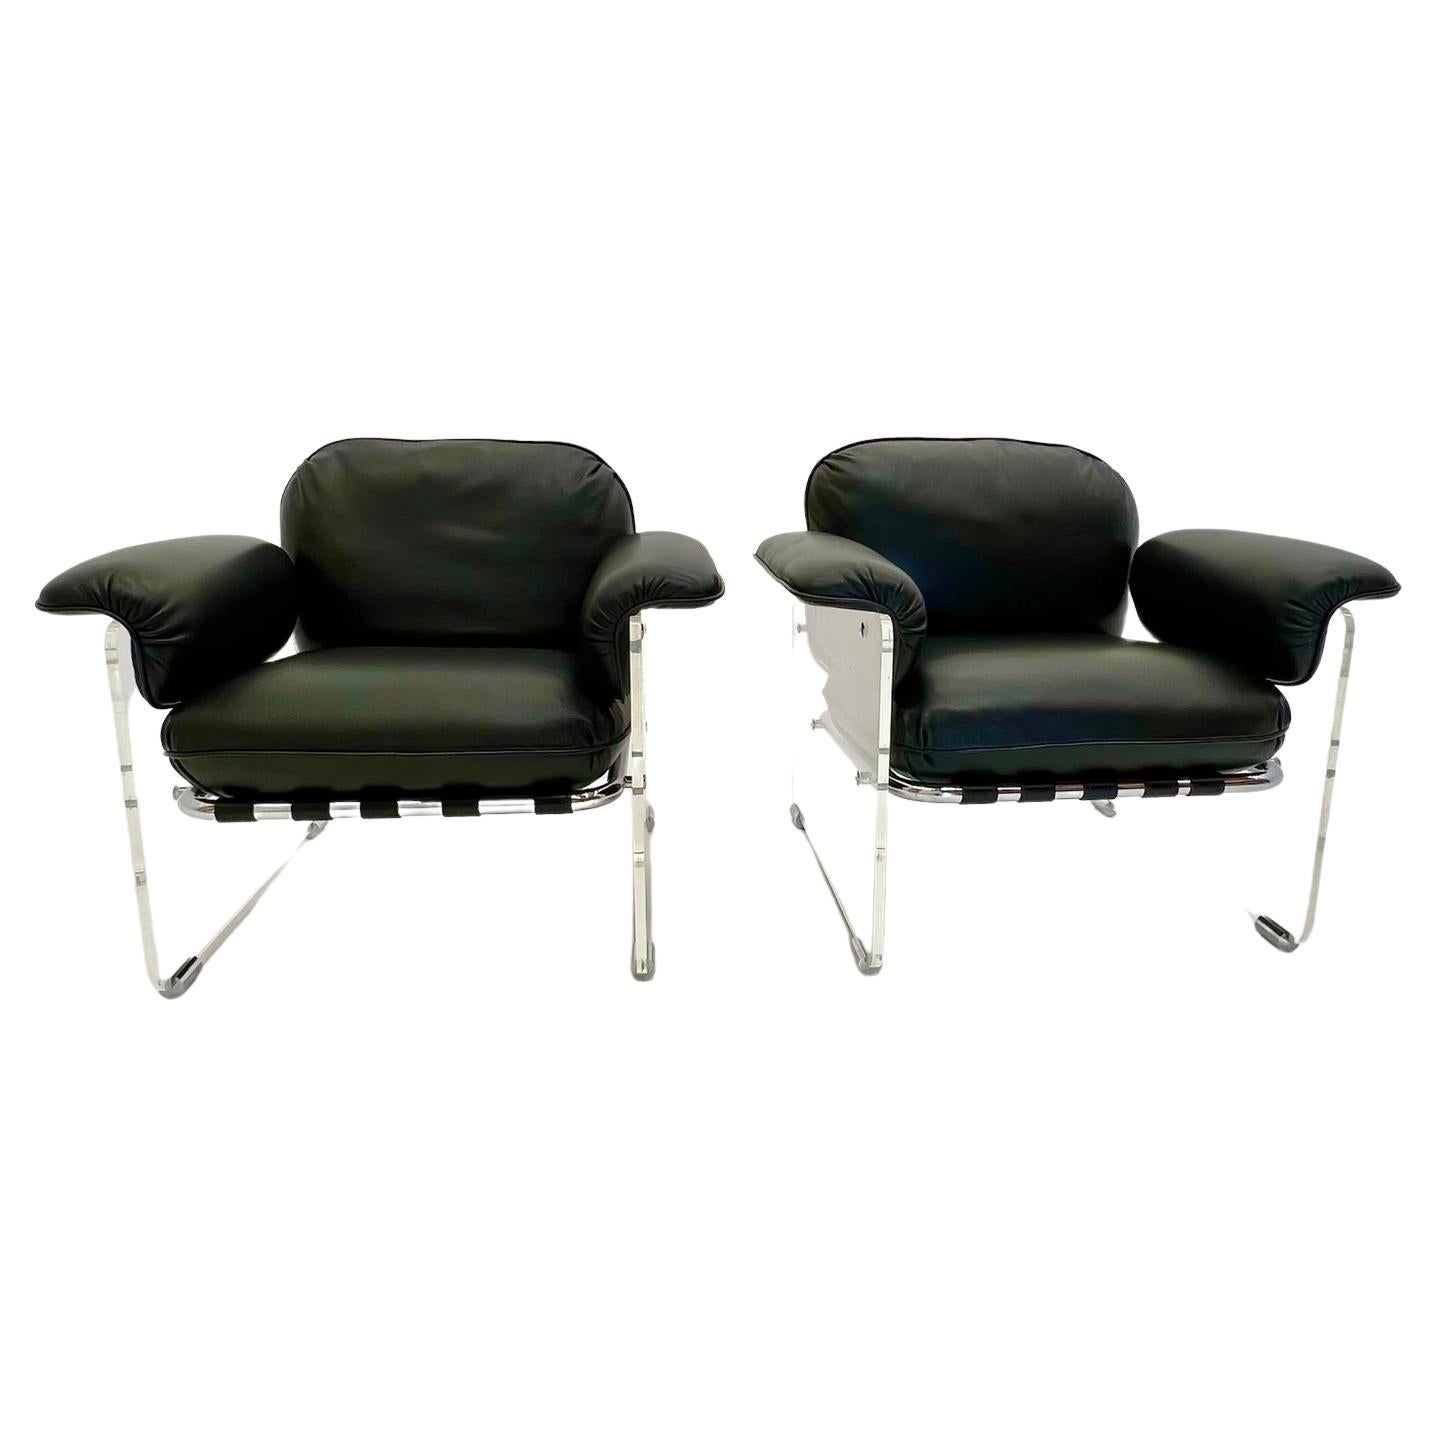 Pace Collection Argenta Lucite Chairs in Italian Leather For Sale